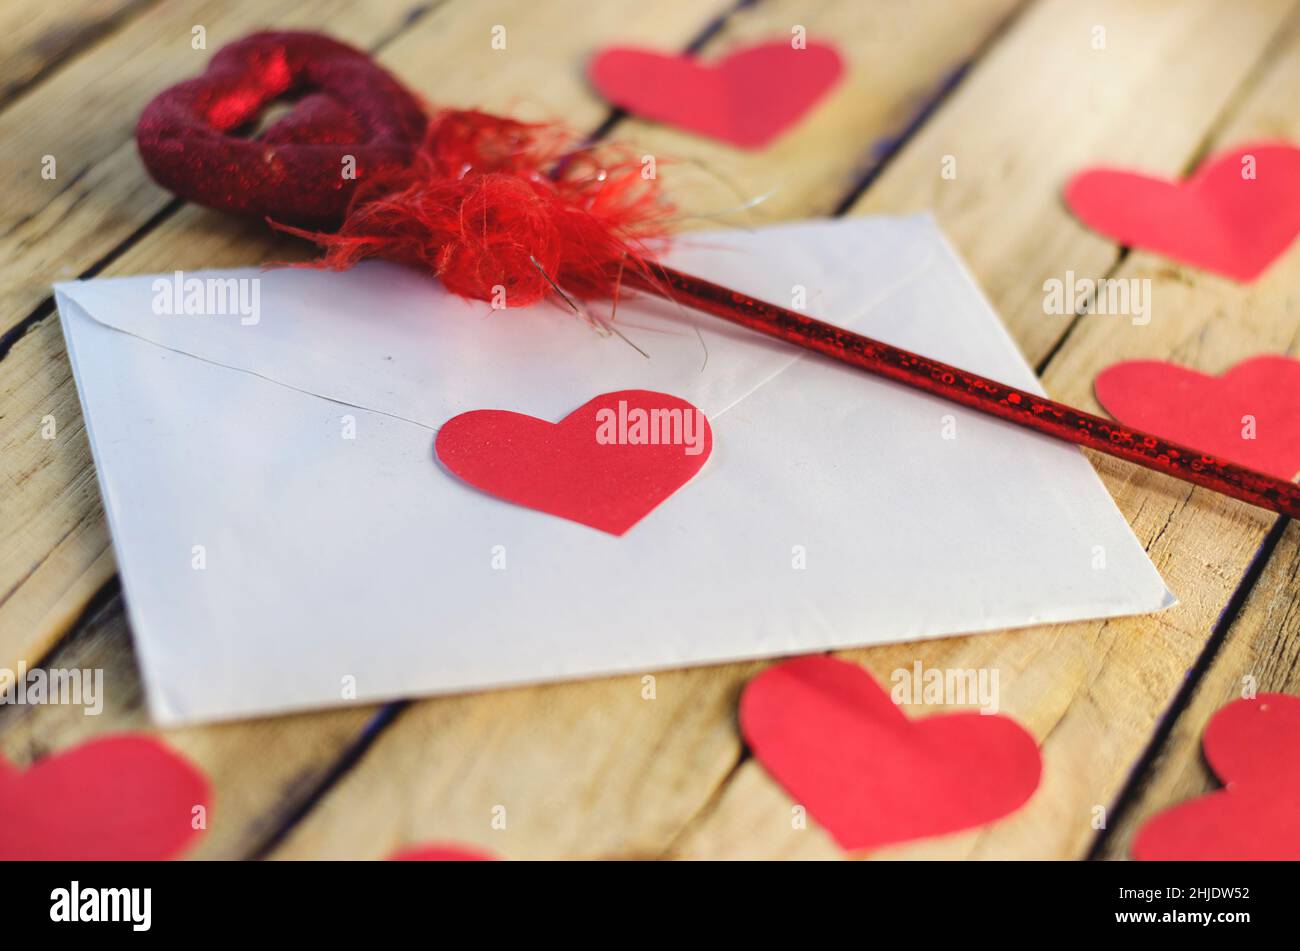 writing and red hearts on a wooden surface Stock Photo